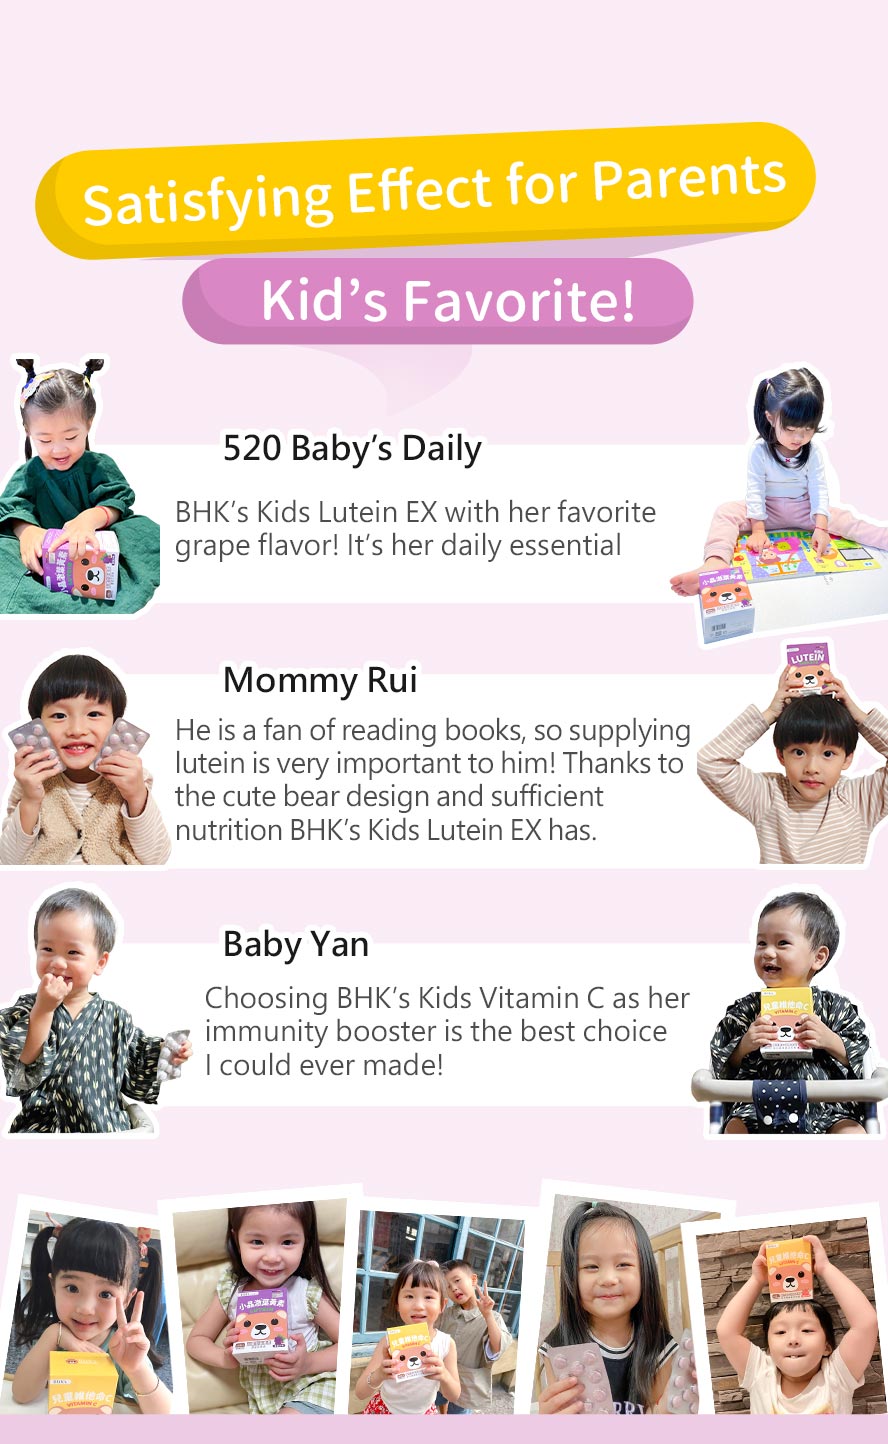 BHK's Kids Lutein EX + BHK's Kids Vitamin C are favourite by parents and children with great effect and high palatability